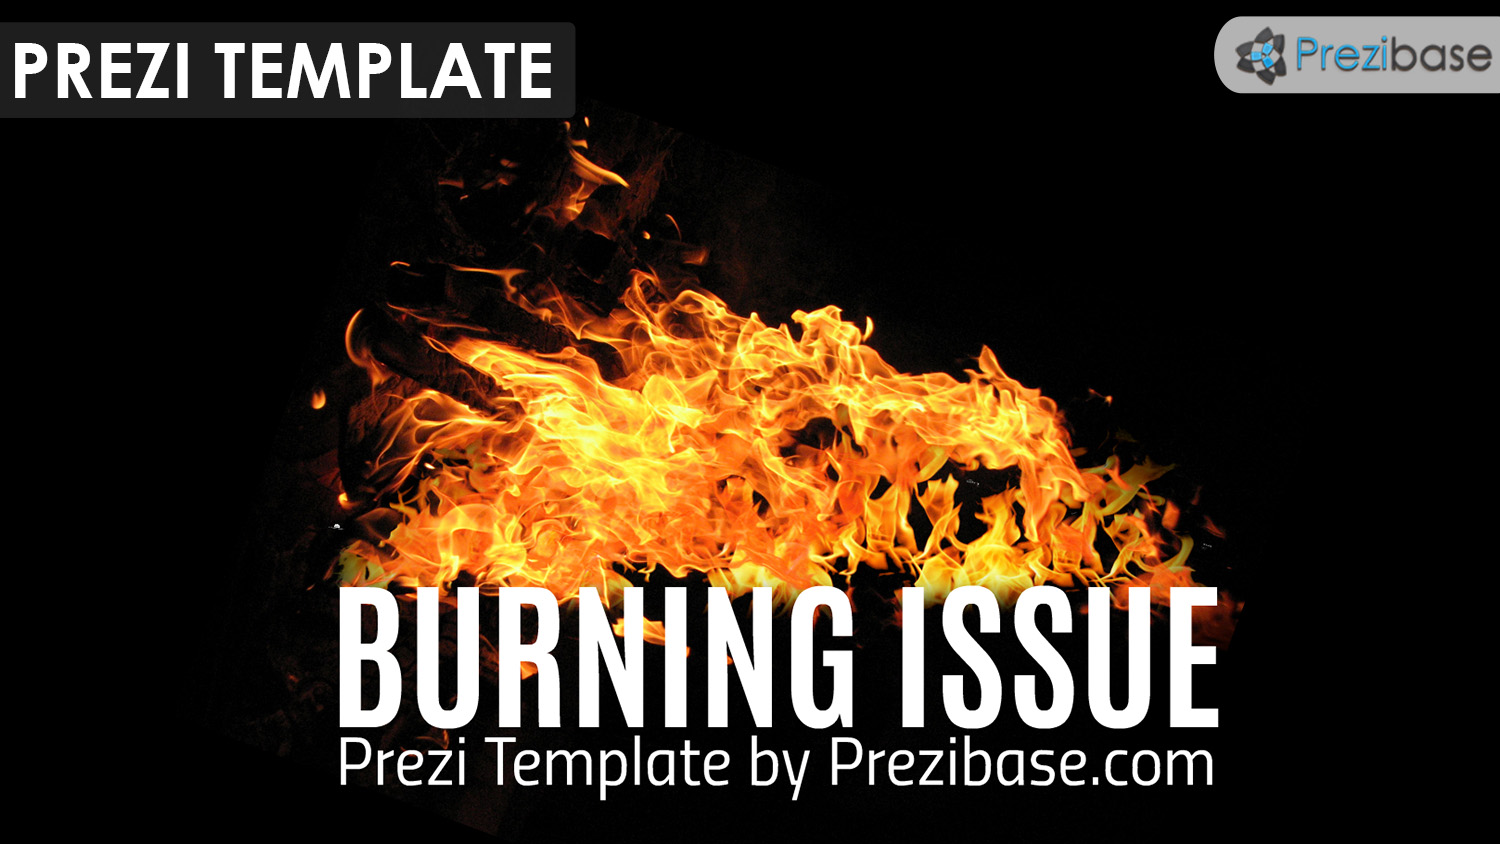 Fire and flames prezi template for burning issue